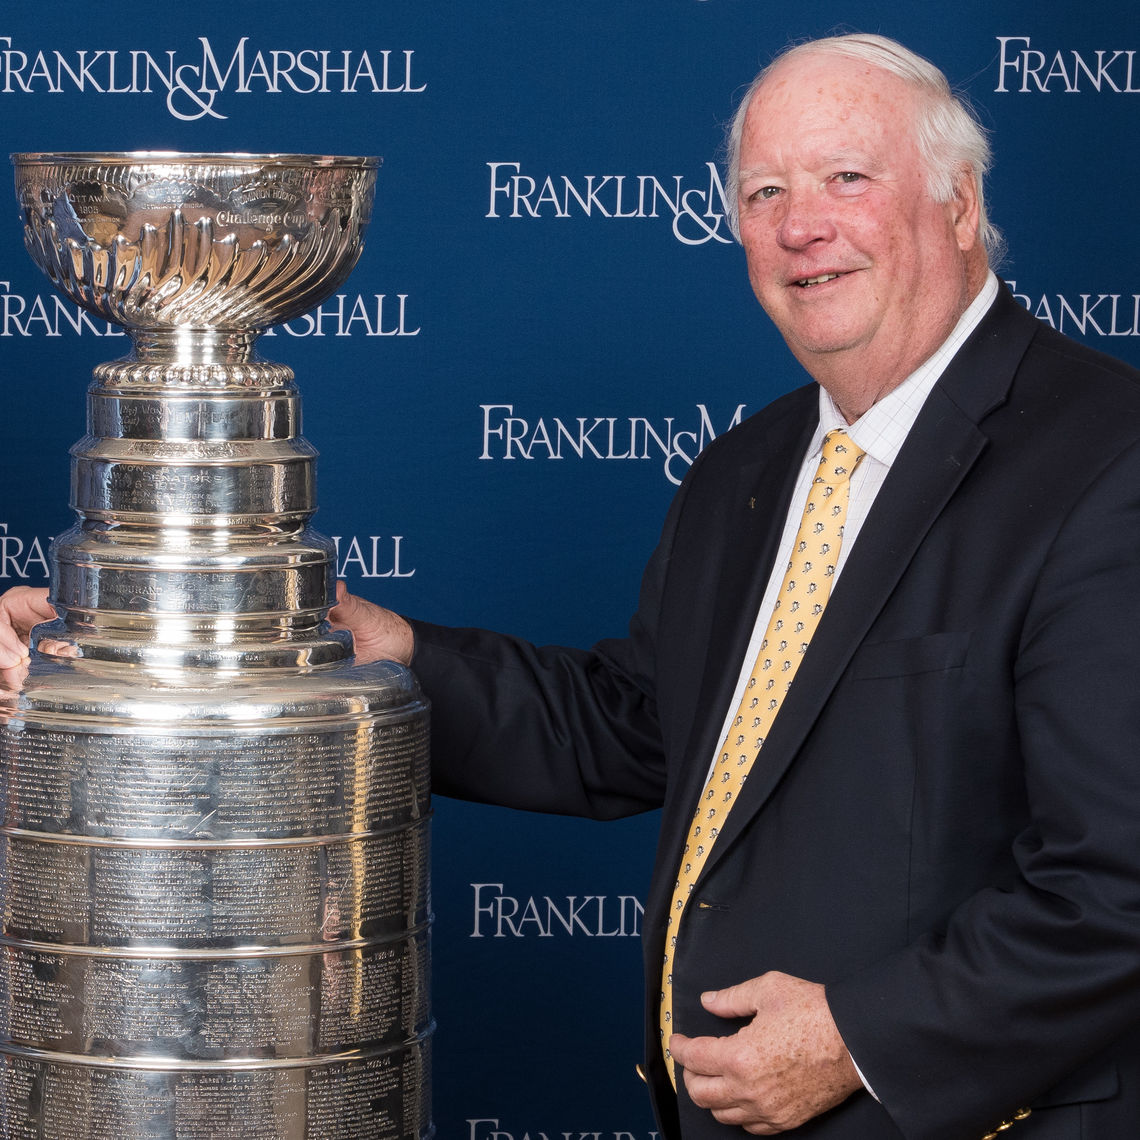 Bob Brooks '66, P'98 has twice brought the Stanley Cup to campus to share with the F&M community following NHL championships won by the Pittsburgh Penguins. He is a minority owner of the team.